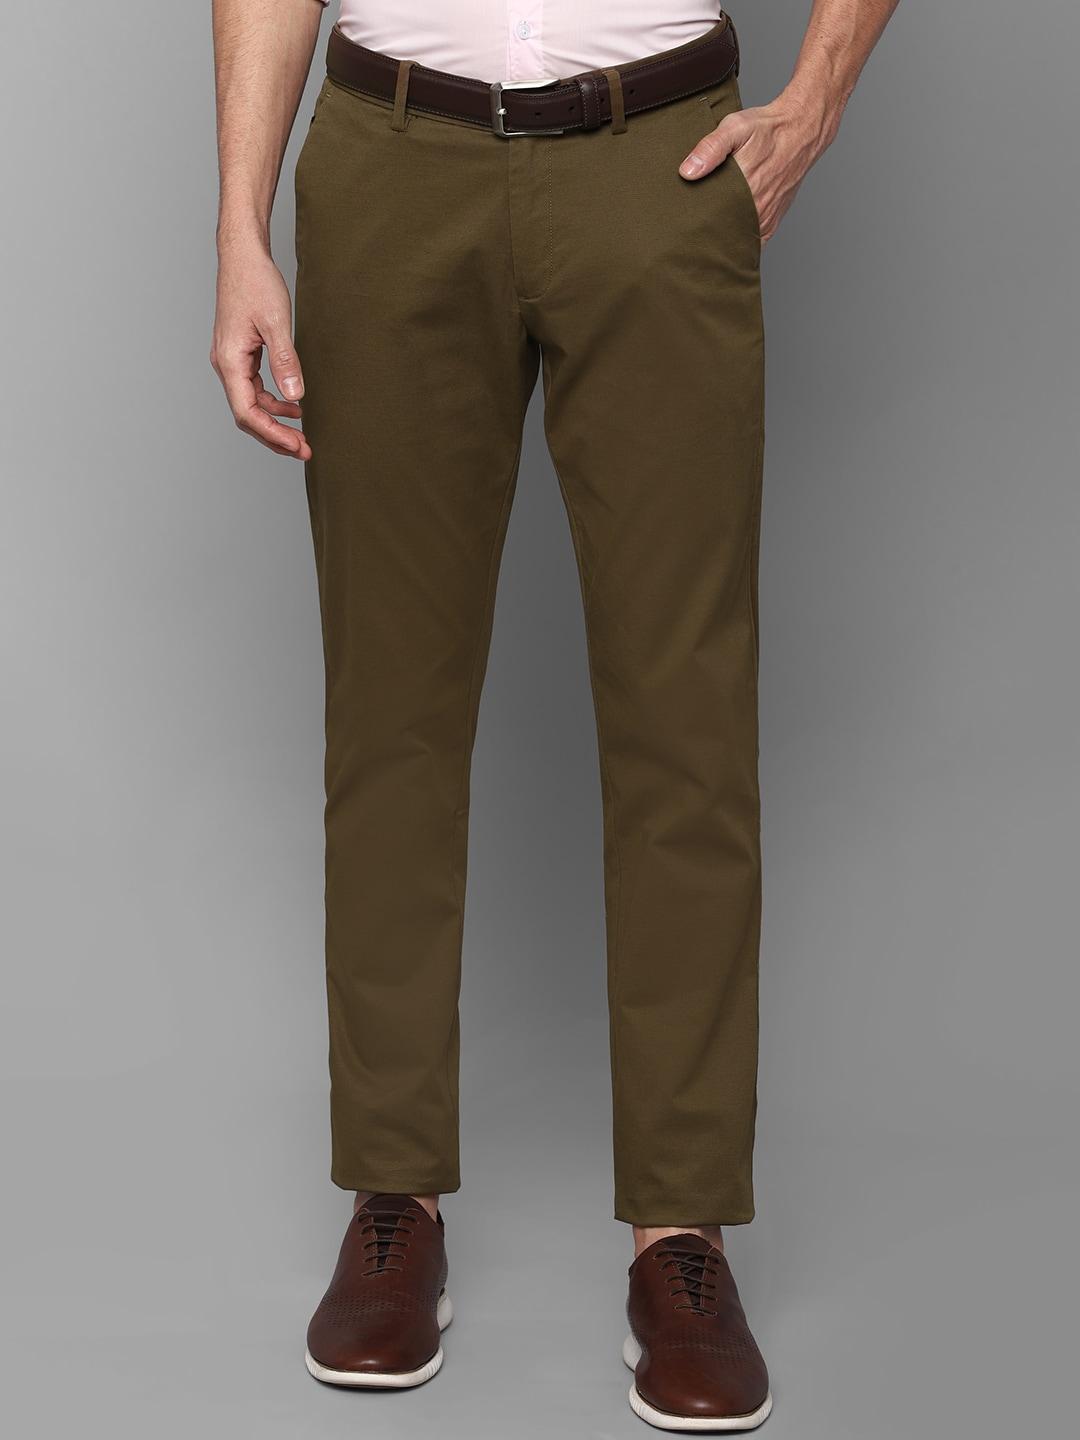 Allen Solly Men Olive Green Slim Fit Mid-Rise Casual Trousers